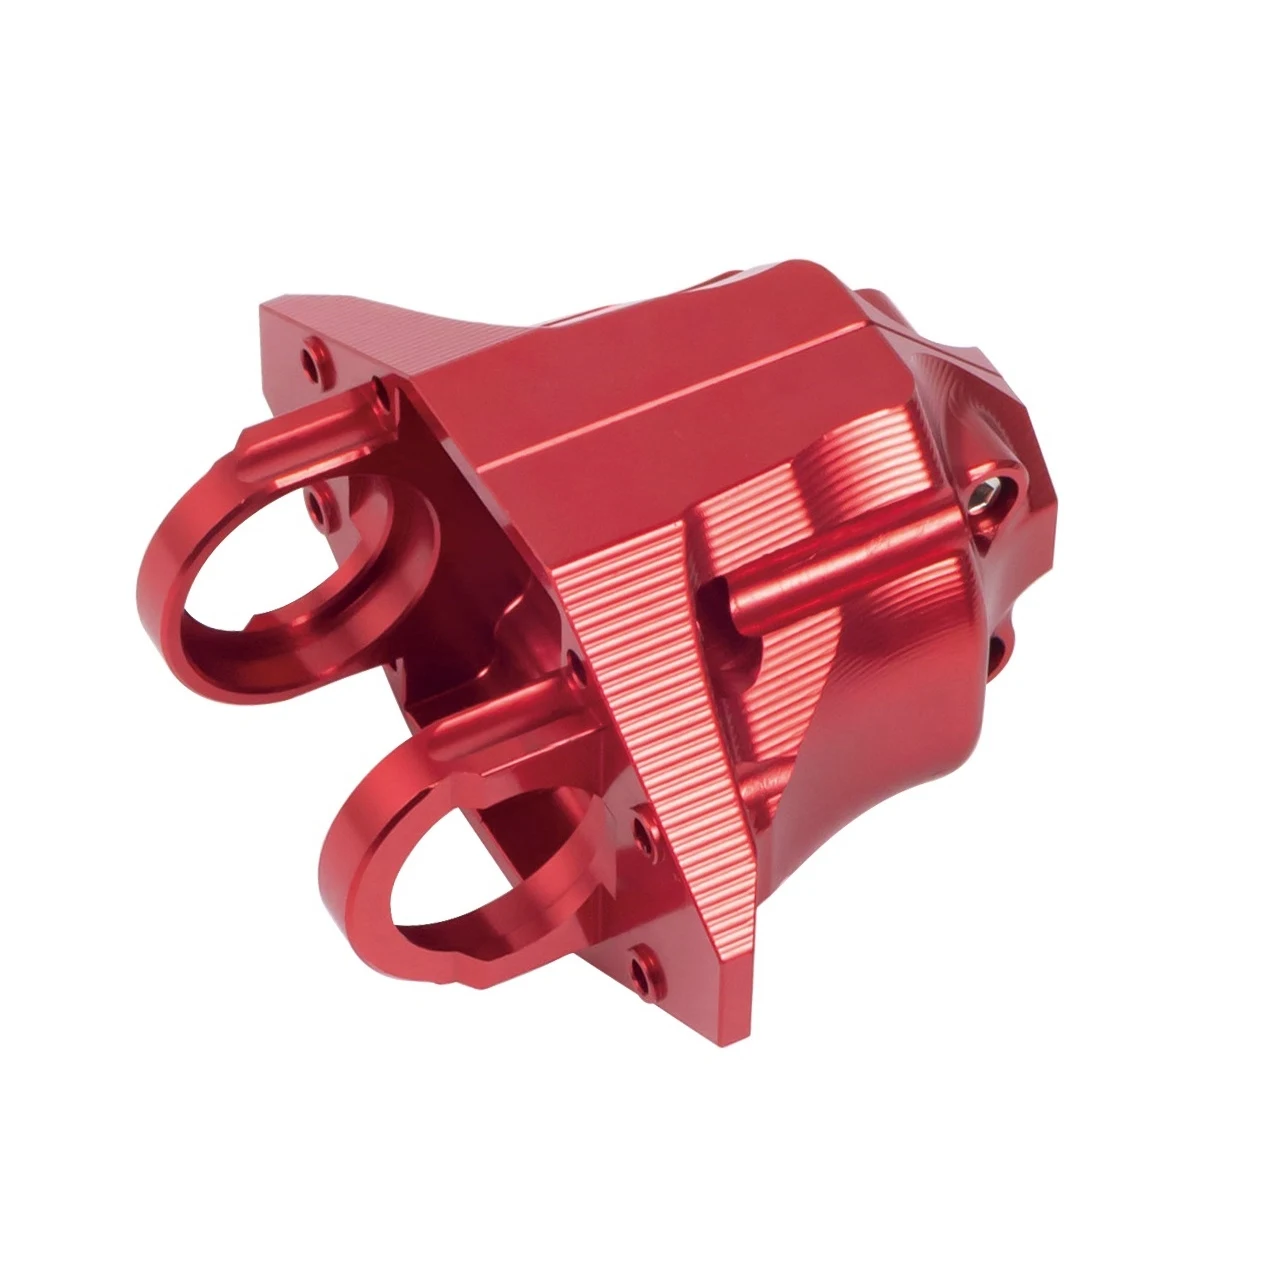 

Metal CNC Rear Axle Diff Cover Differential Cover for Traxxas Unlimited Desert Racer UDR 1/7 RC Car Upgrade Parts,Red